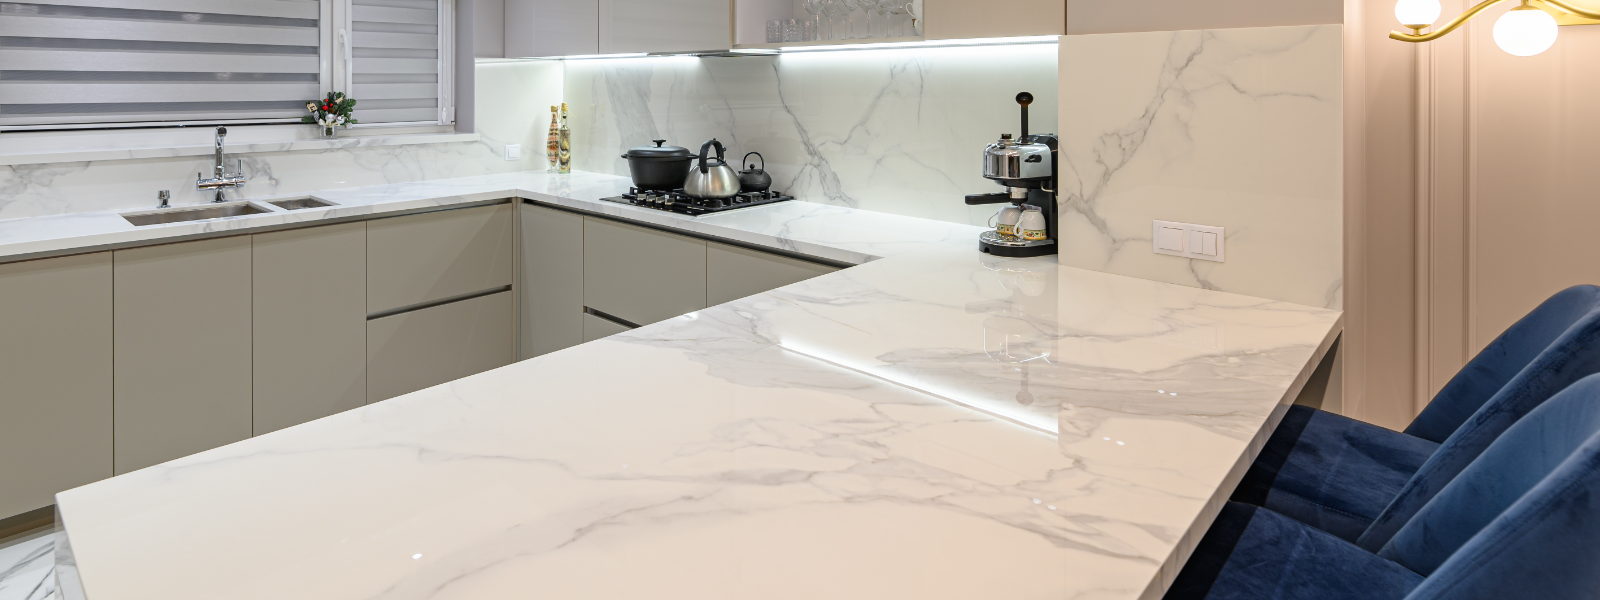 GRANITMAN OÜ - Quality Stone Worktops Your best choice for a quality worktop Get Your Quote Request A Callback Quality St...